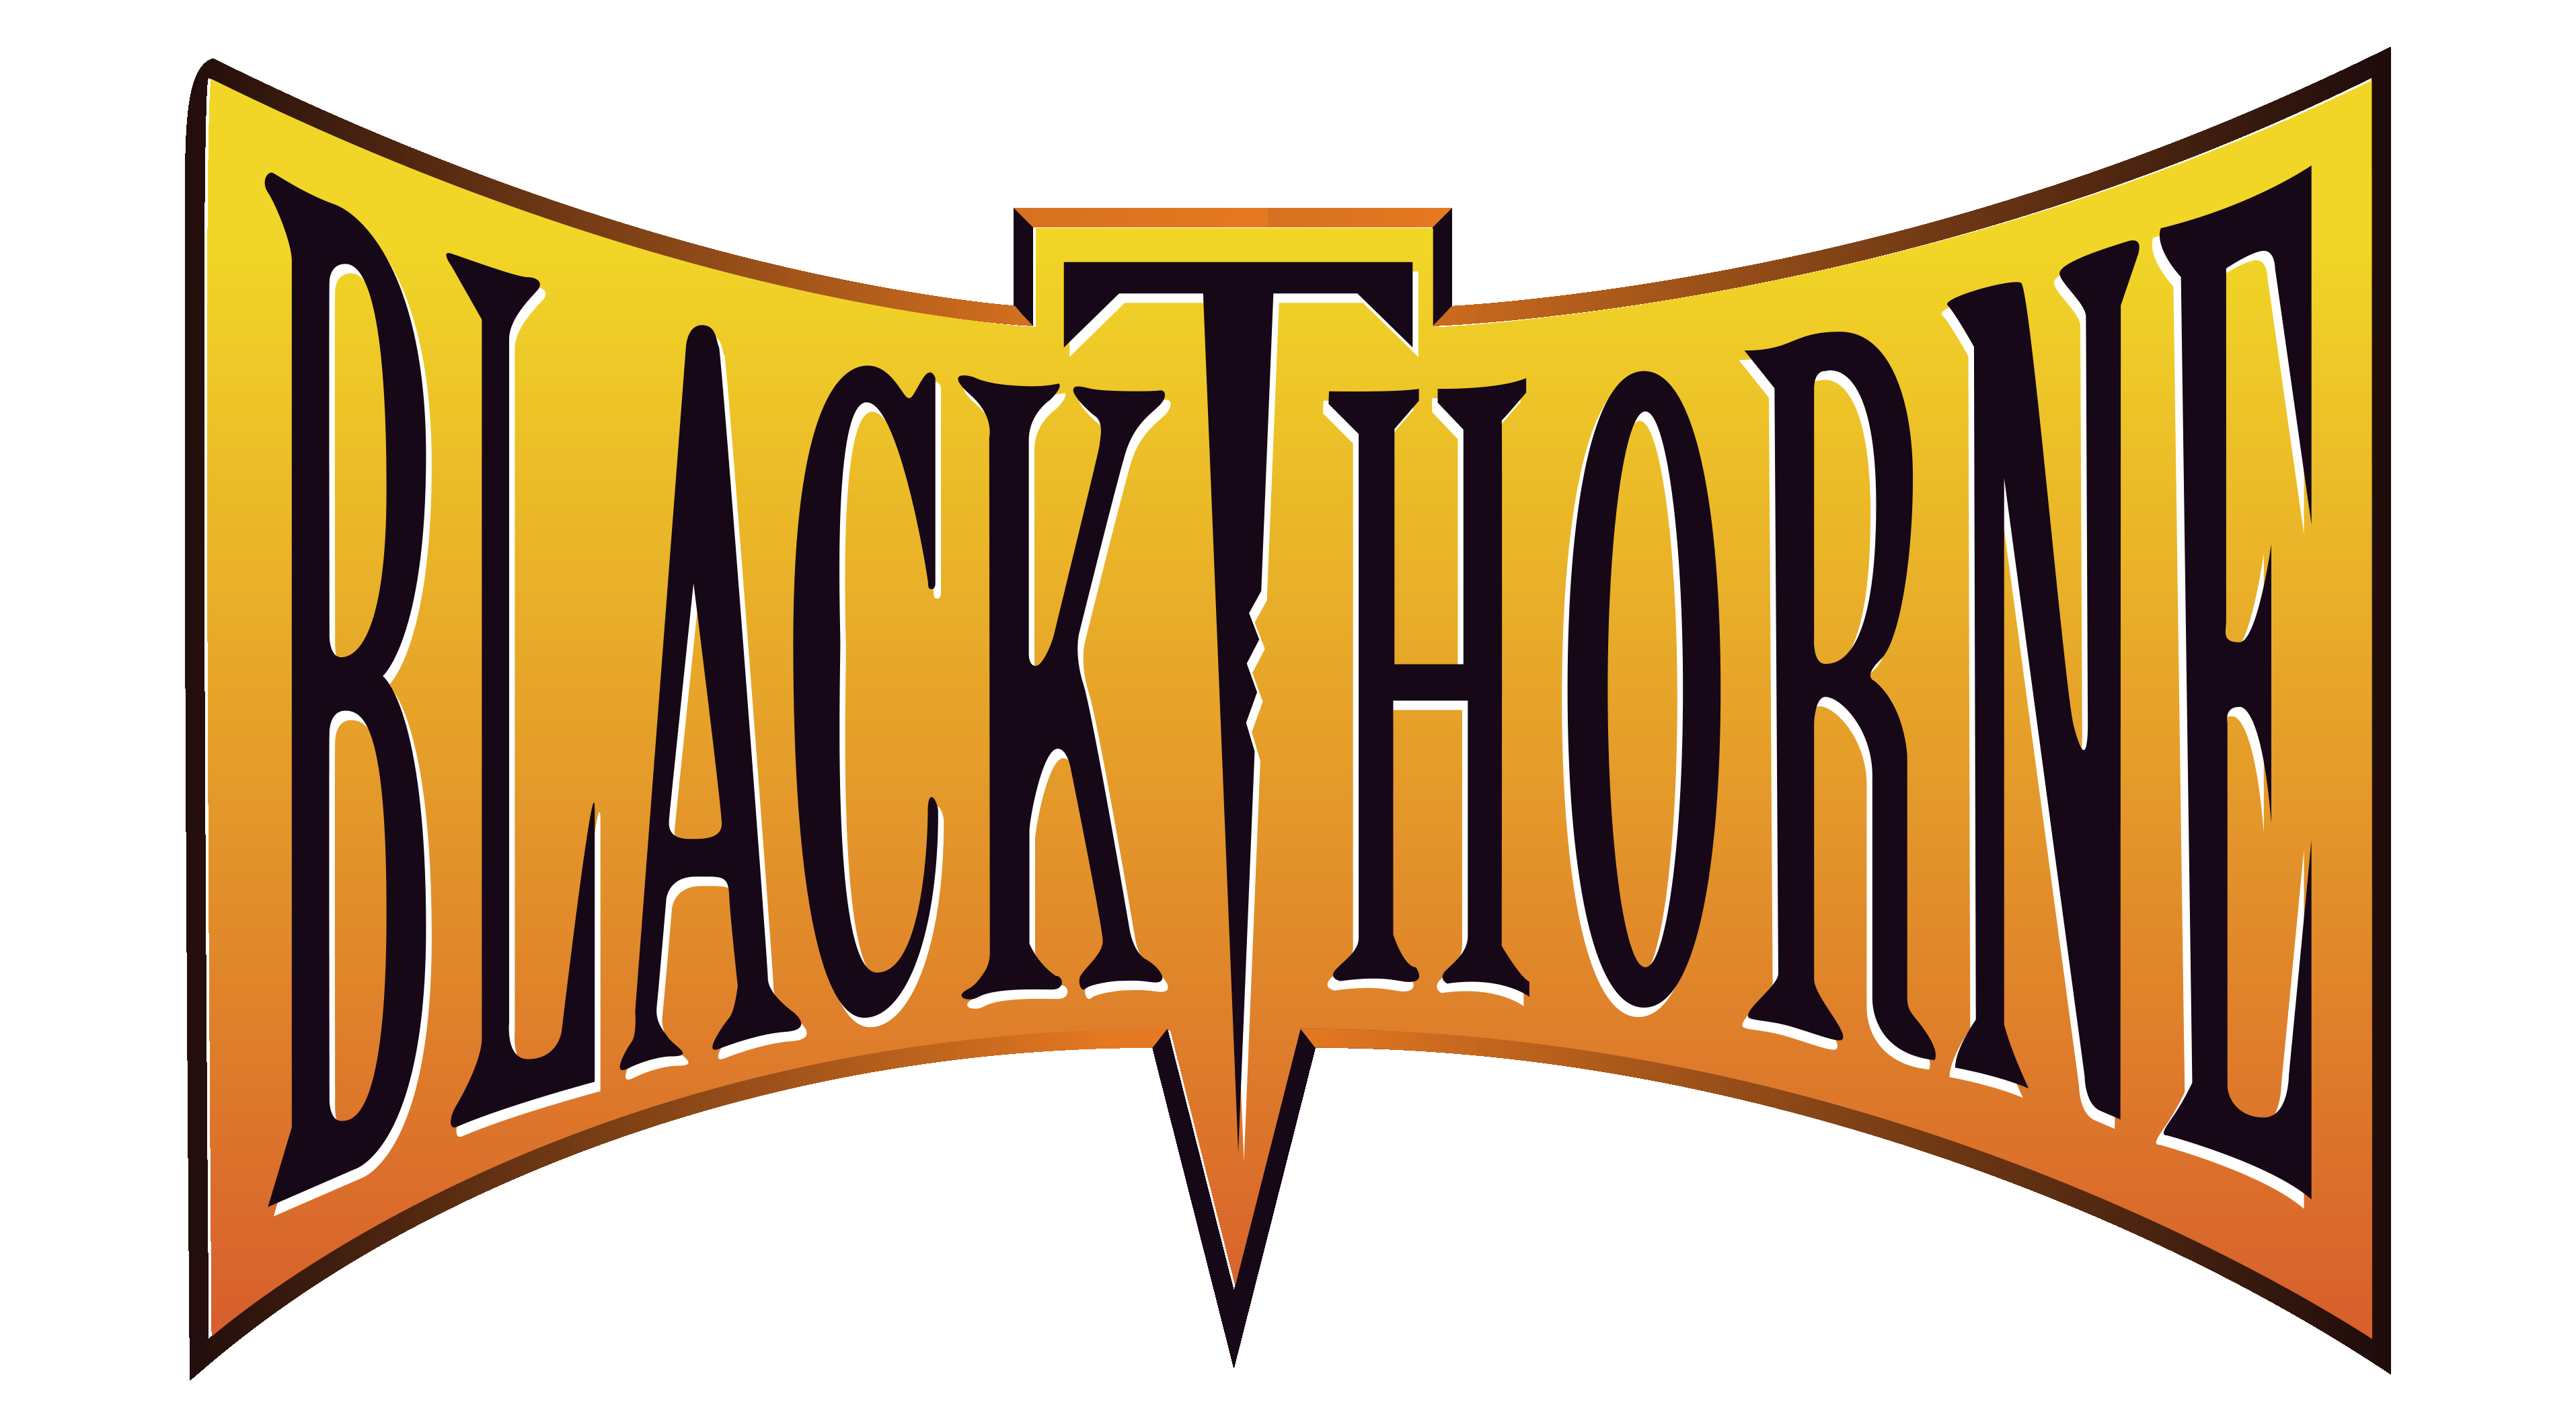 download blackthorne gba